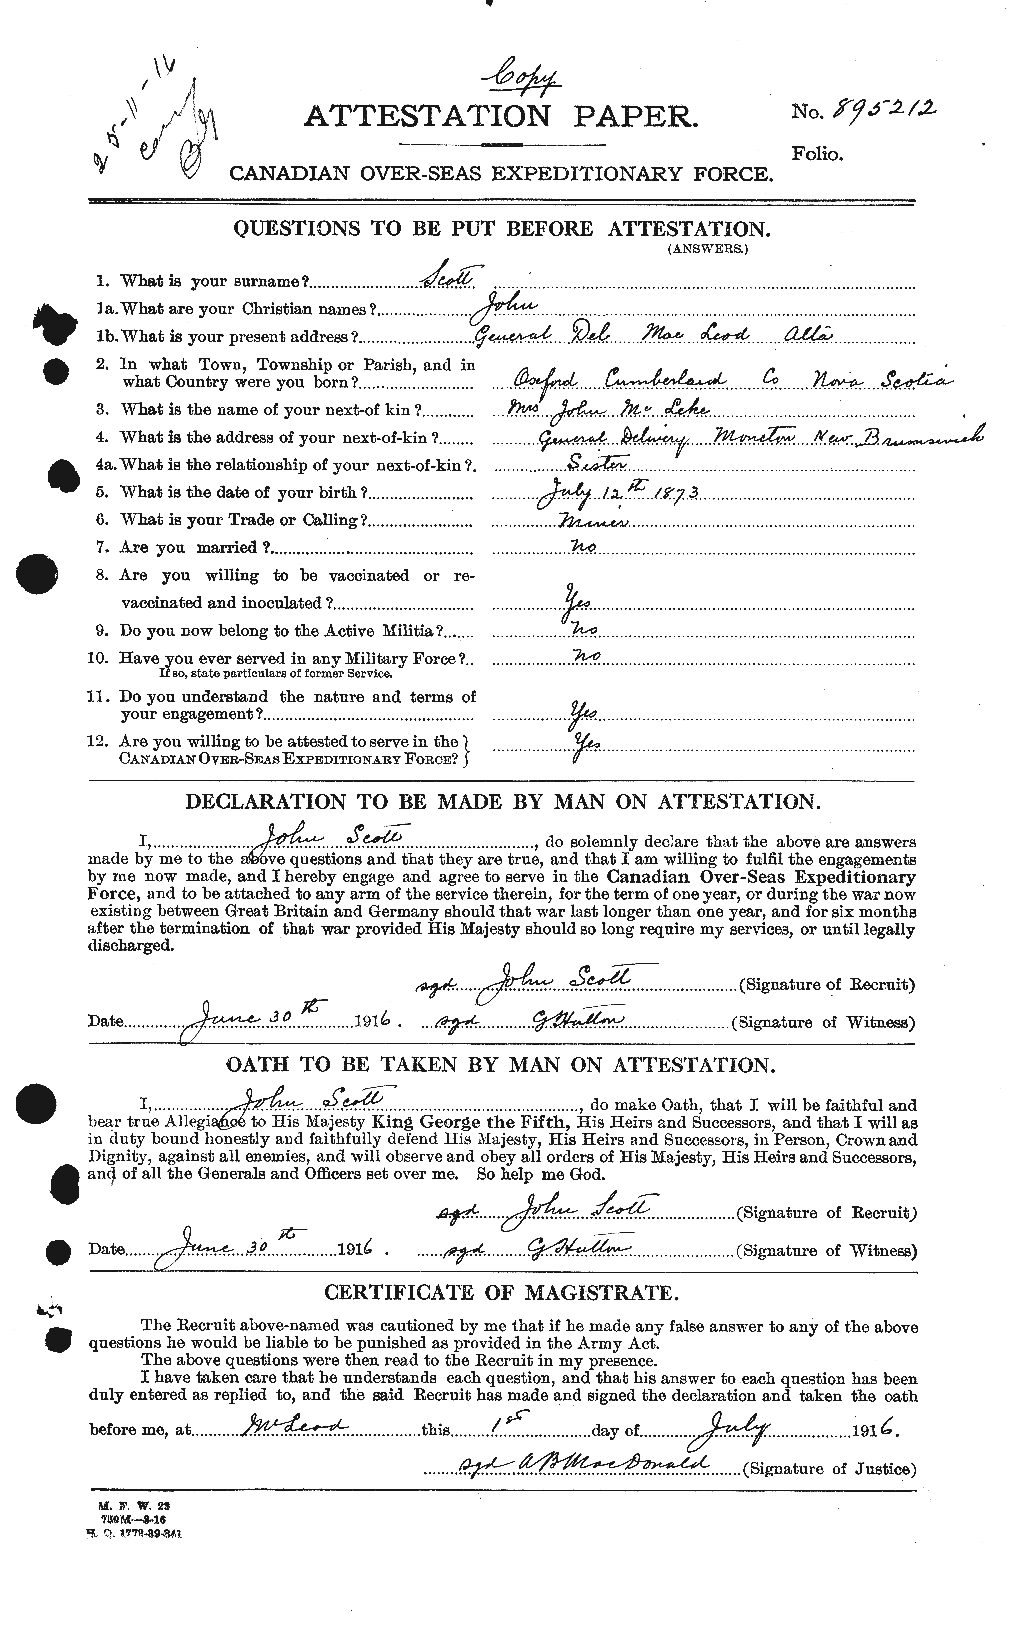 Personnel Records of the First World War - CEF 084893a